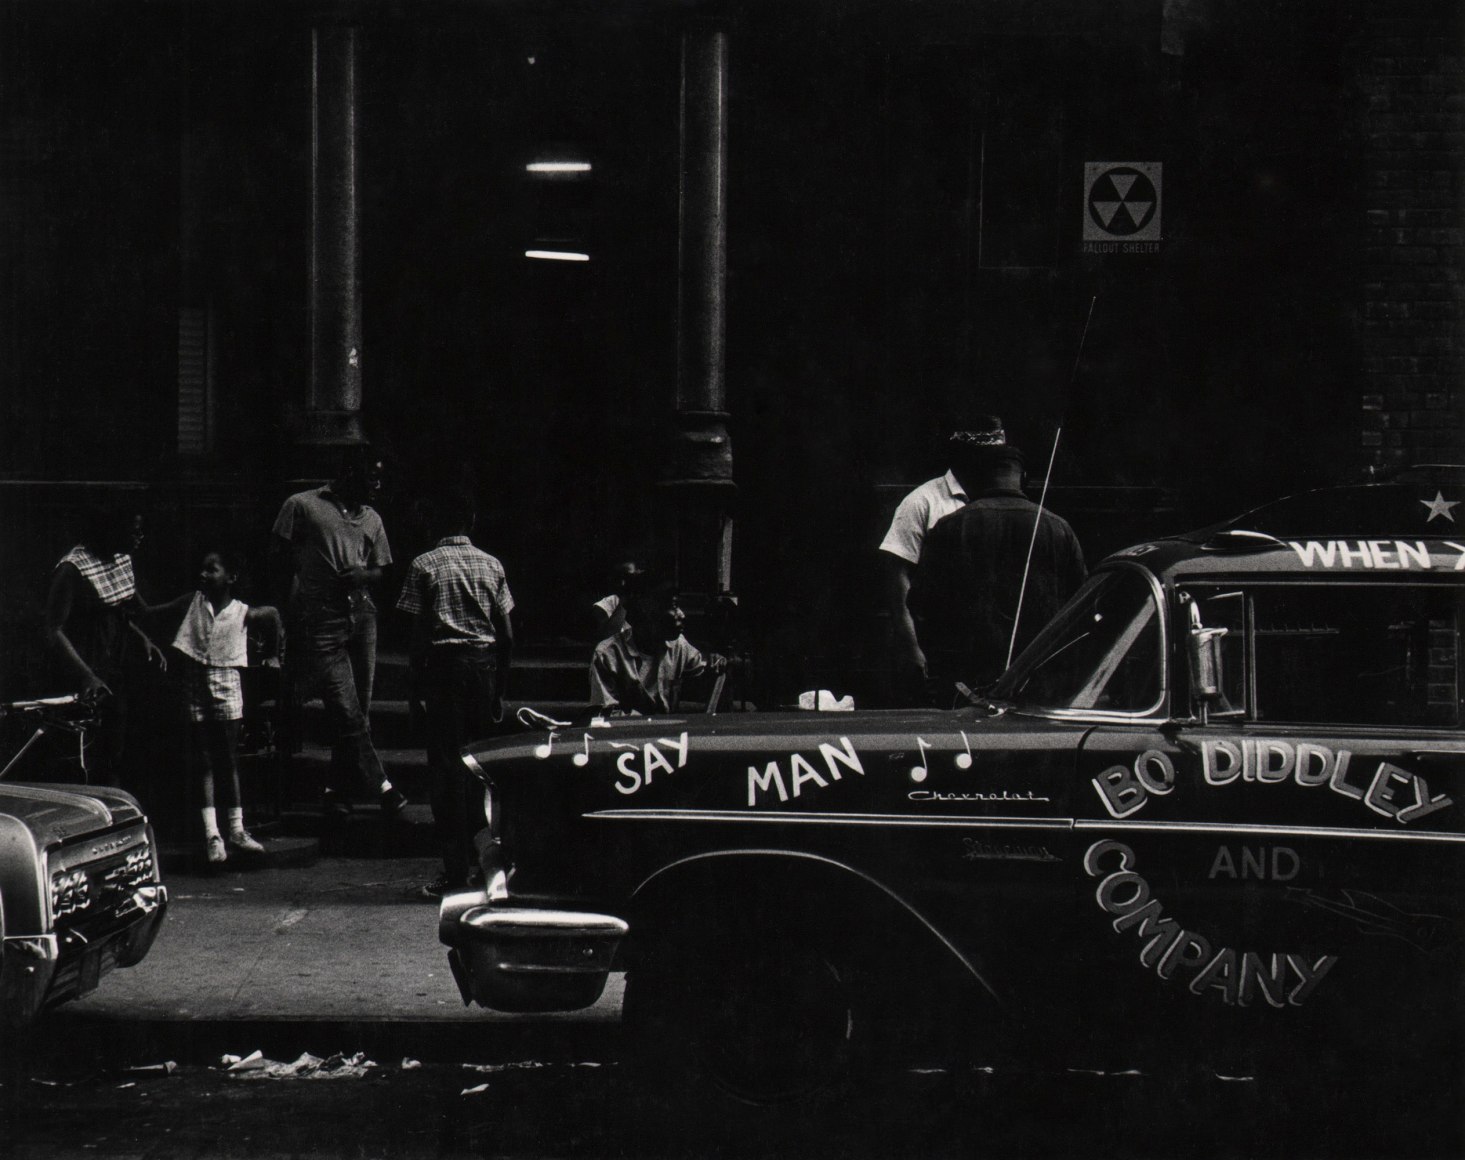 27. Beuford Smith, Say Man, Harlem, ​1969. A car parked on the street that reads &quot;Say Man&quot; and &quot;Bo Diddley and Company&quot;. Figures gathered on the sidewalk behind.